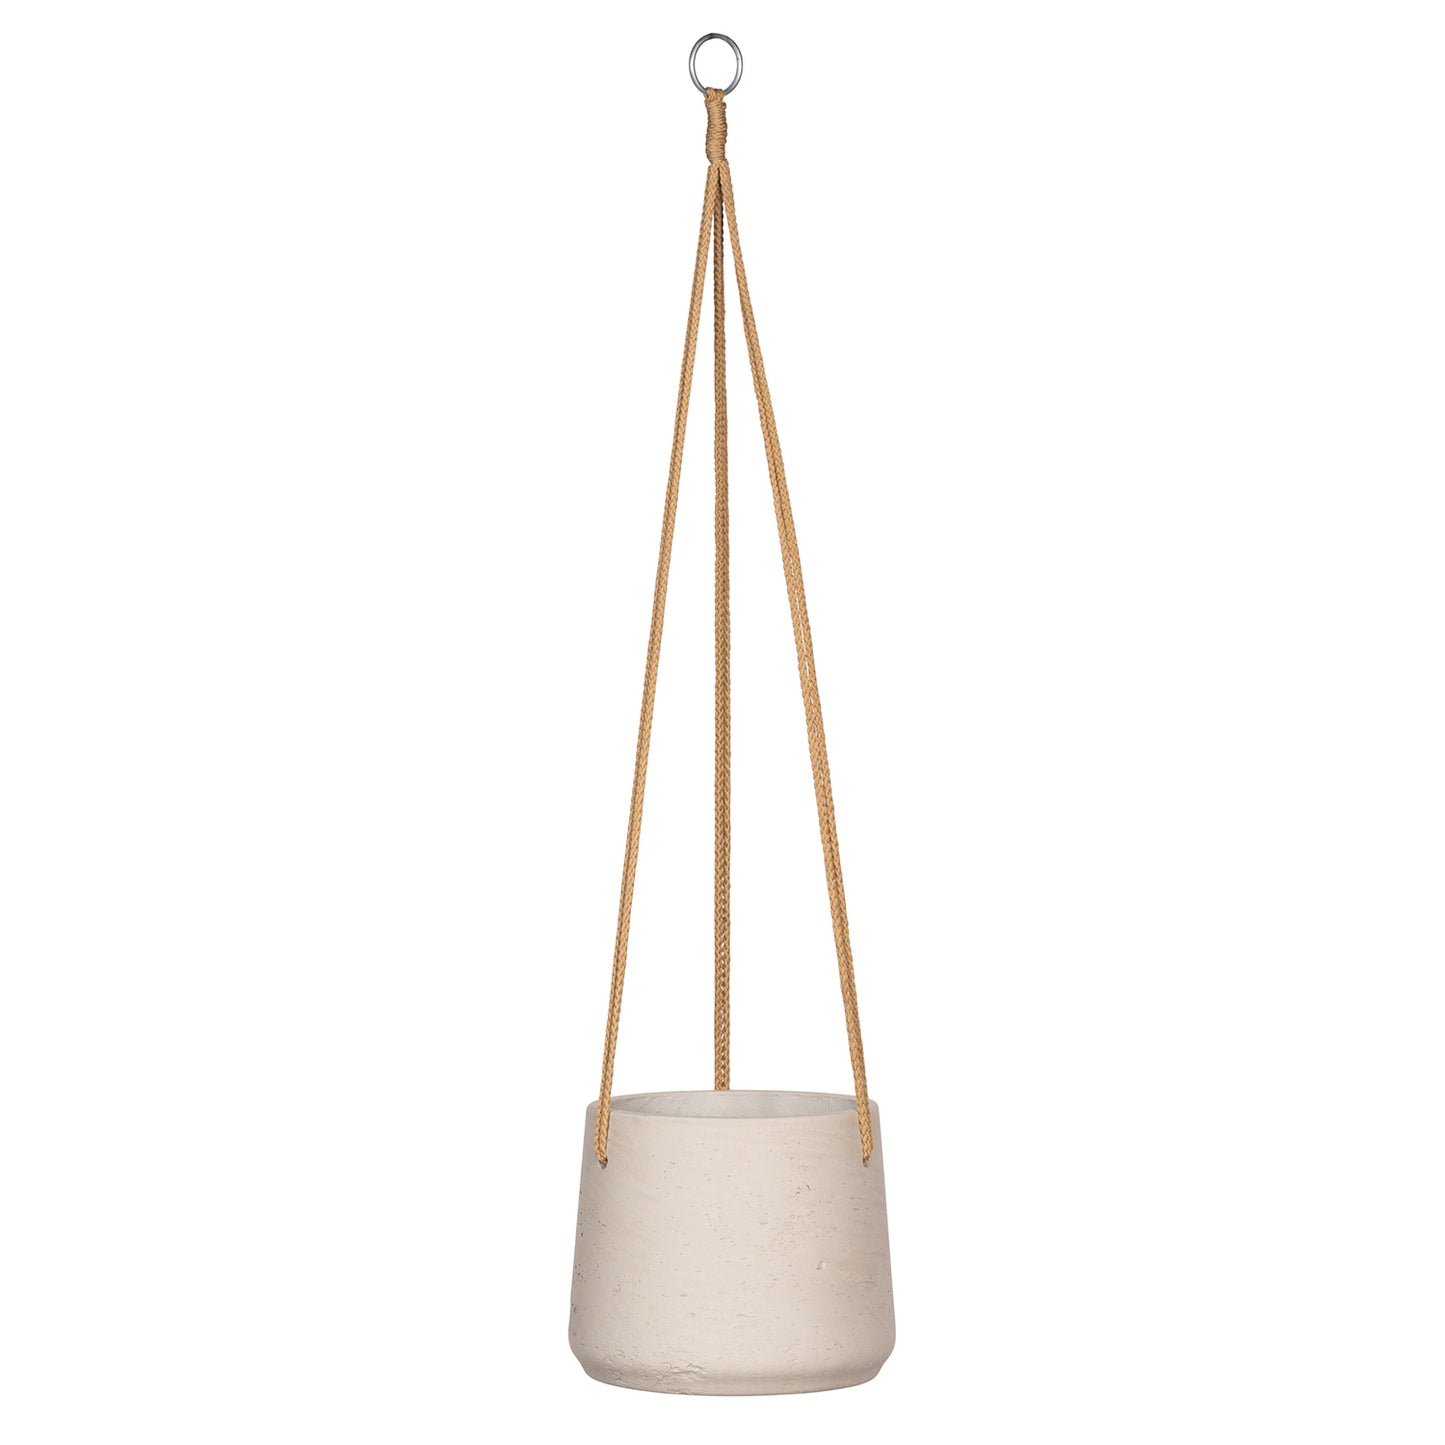 Ficonstone Washed Hanging Planter (7")